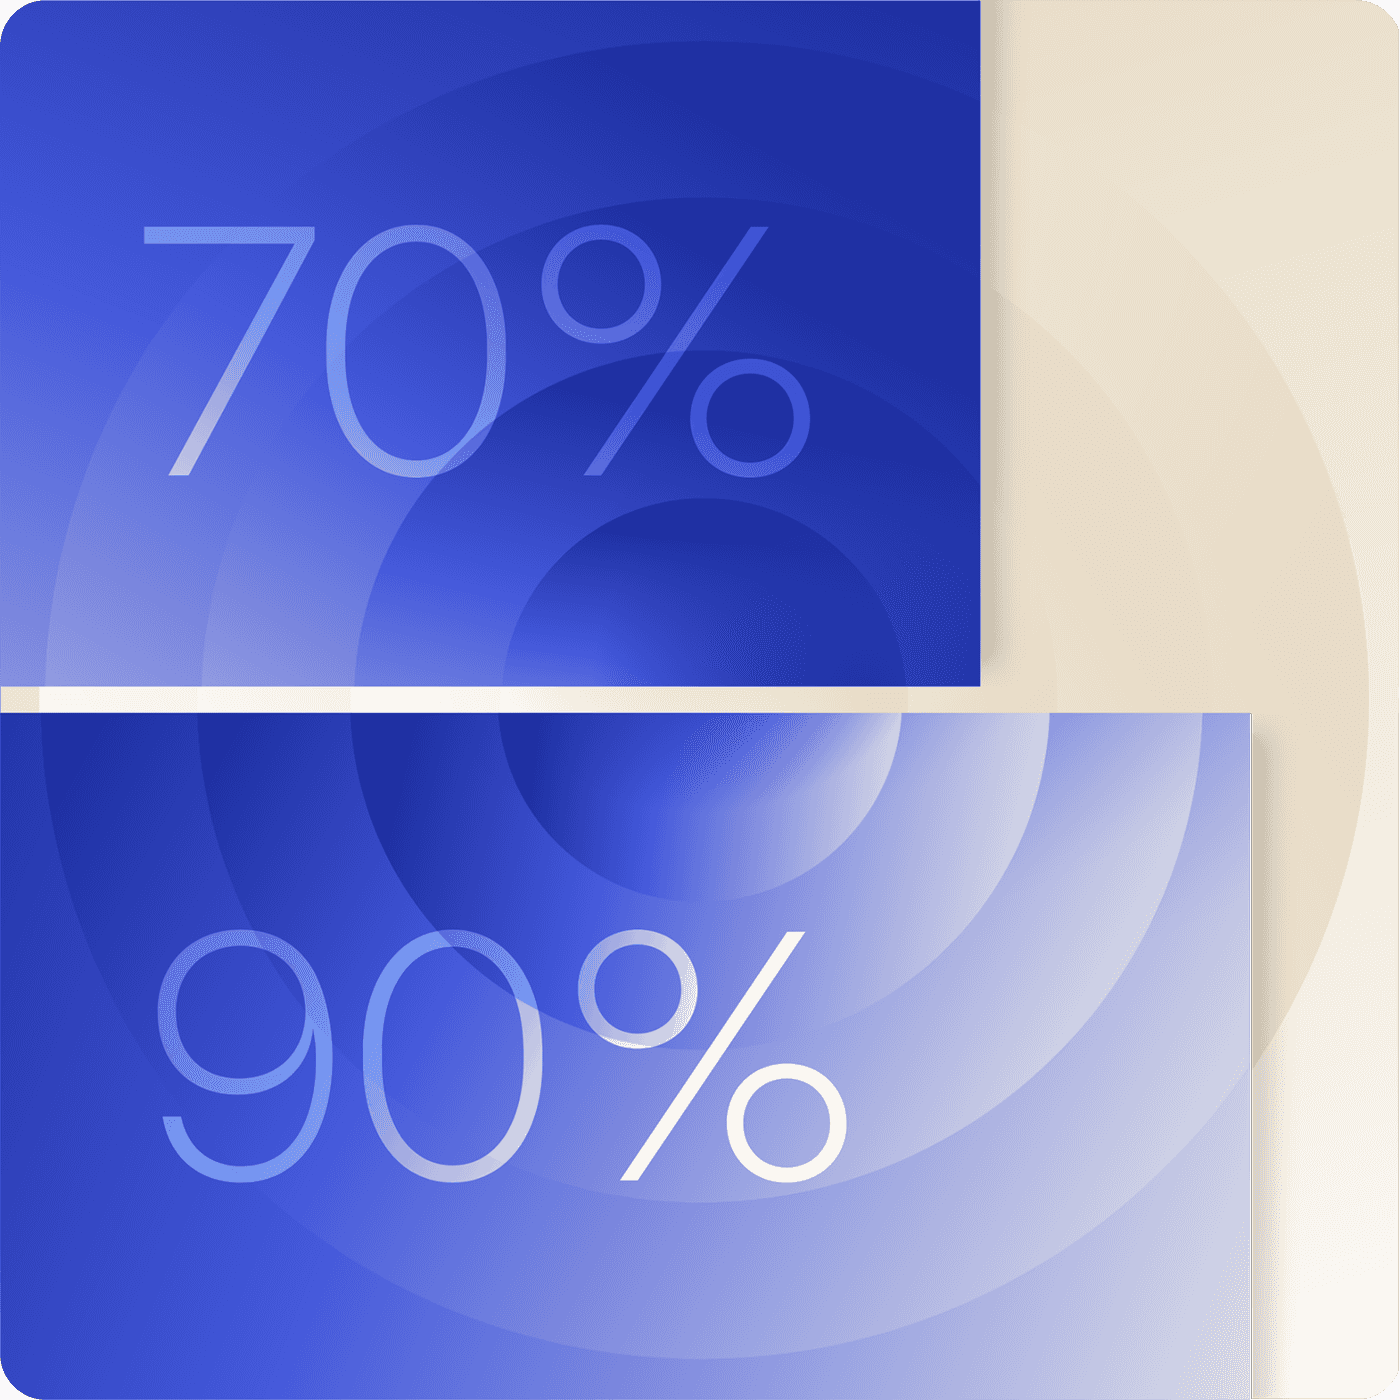 Between 70% and 90%